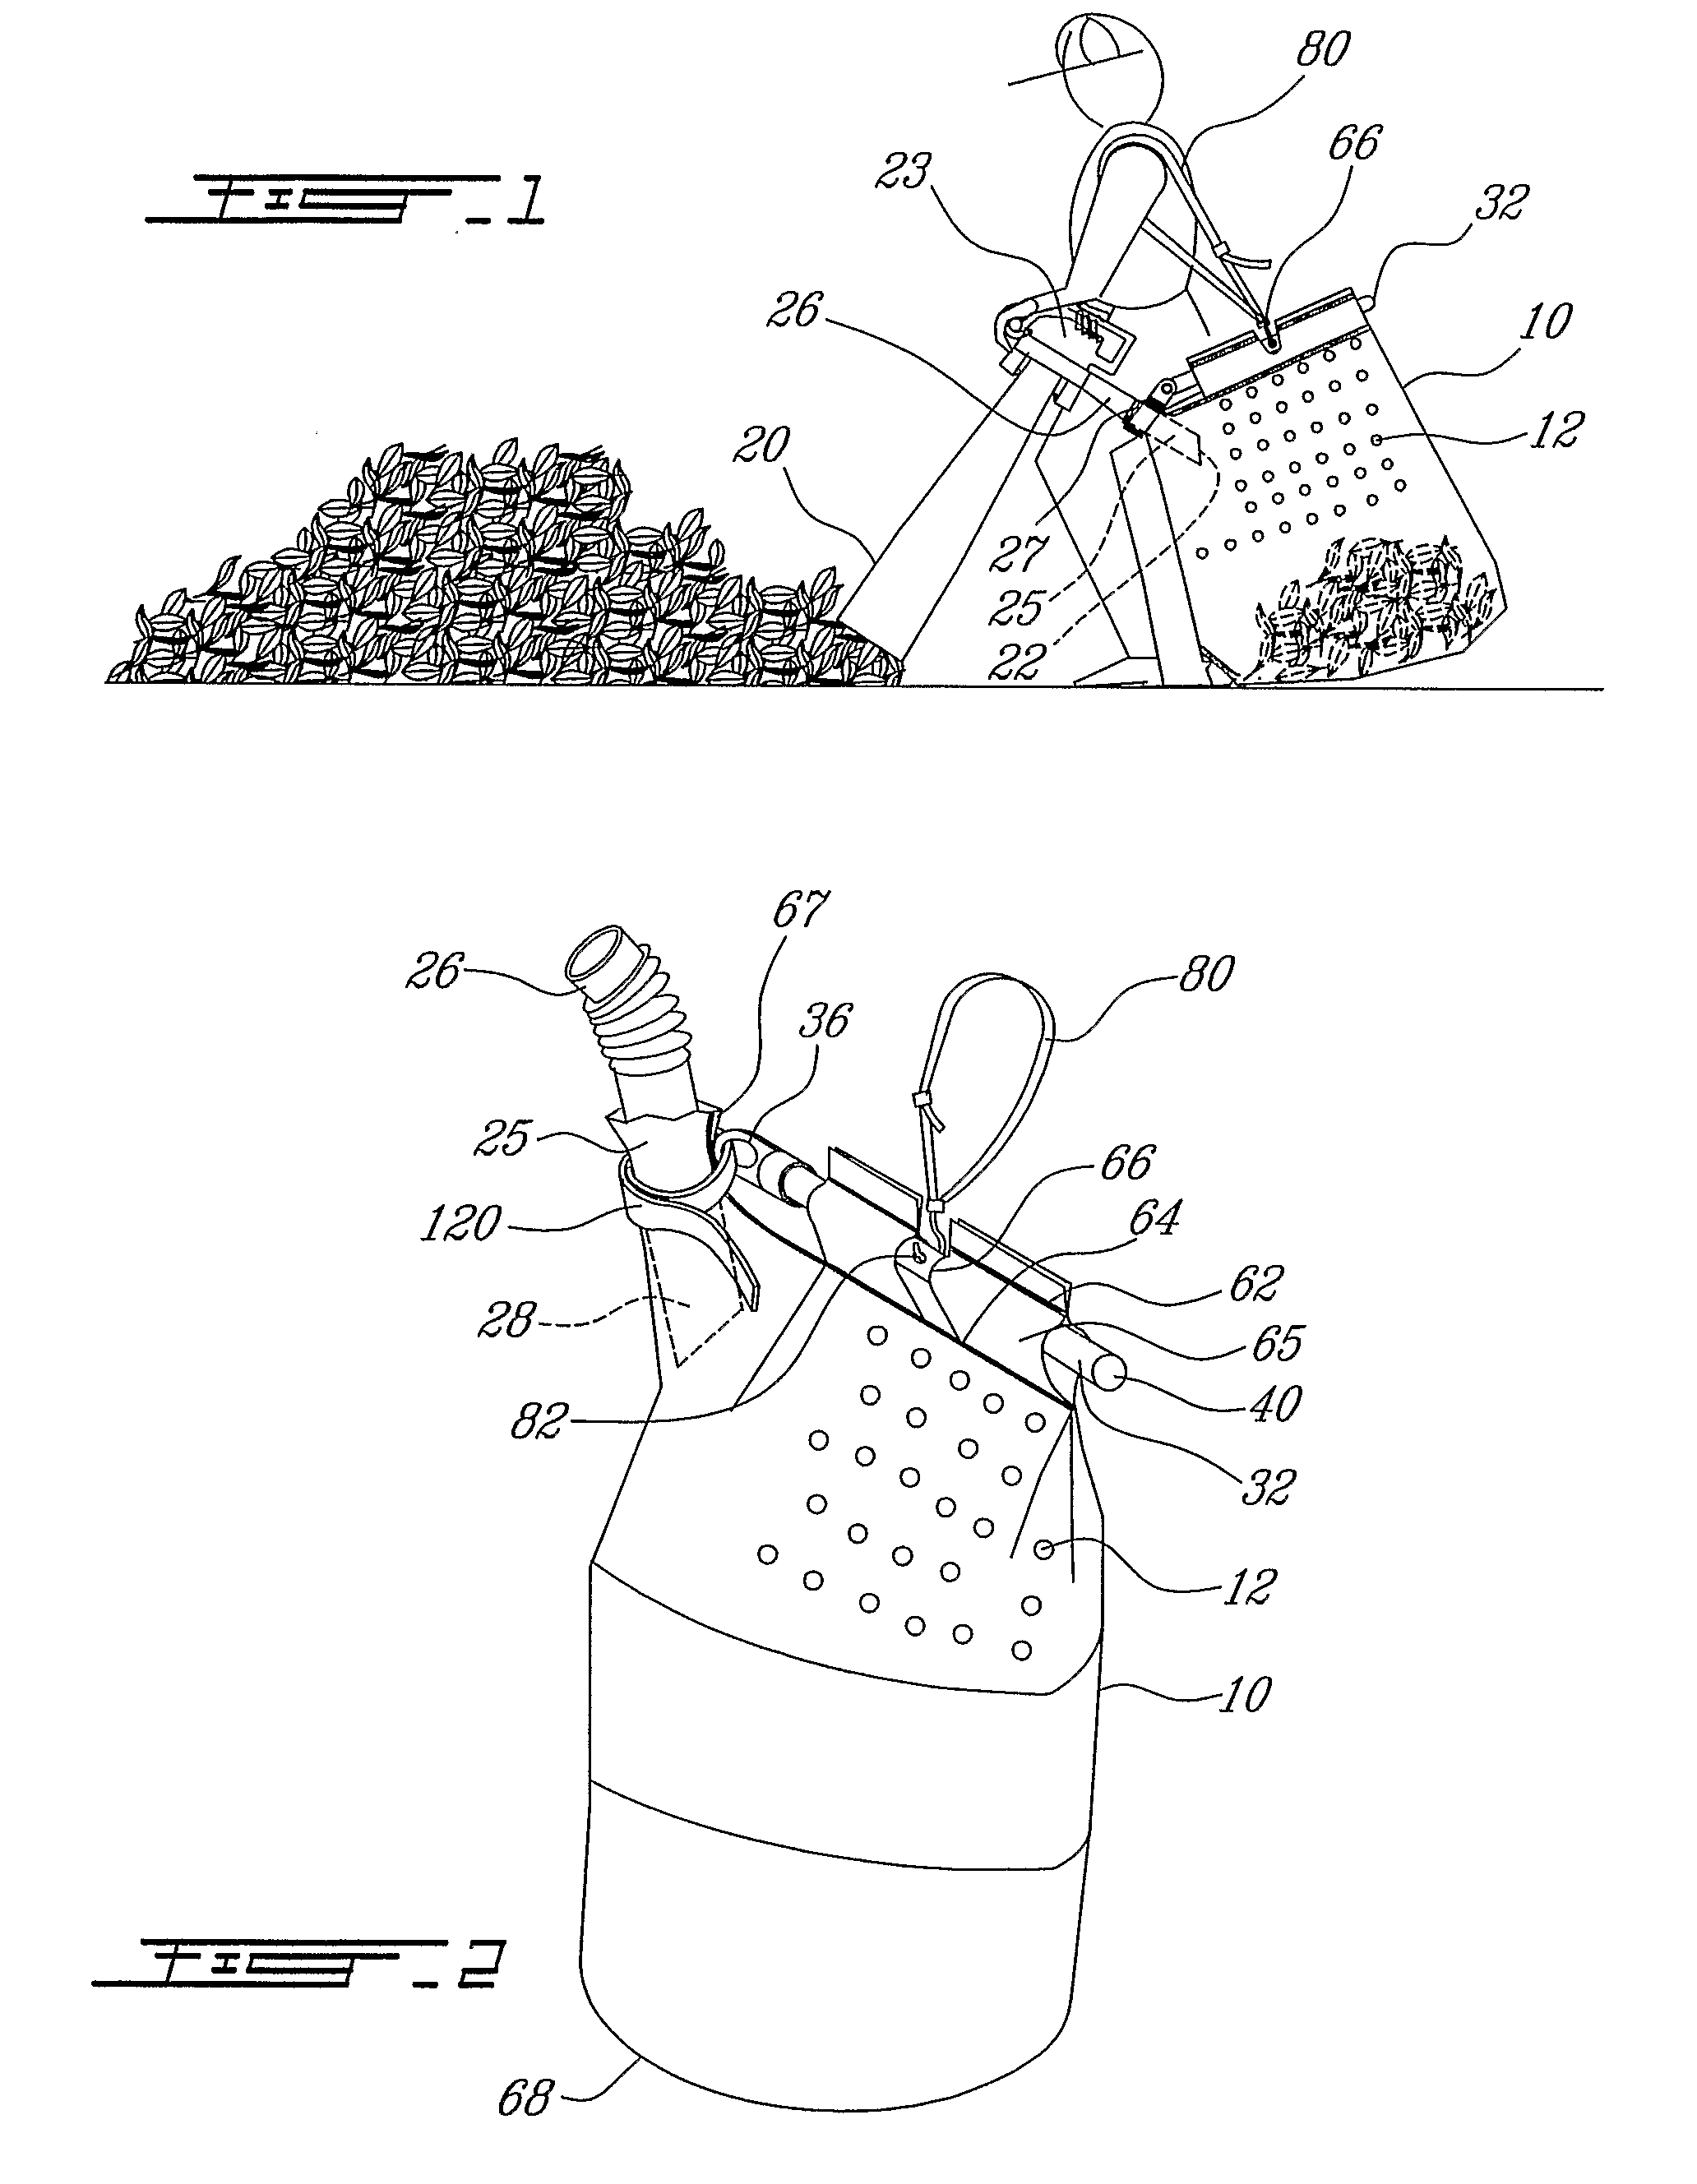 Bag carrying device for a vacuum/blower